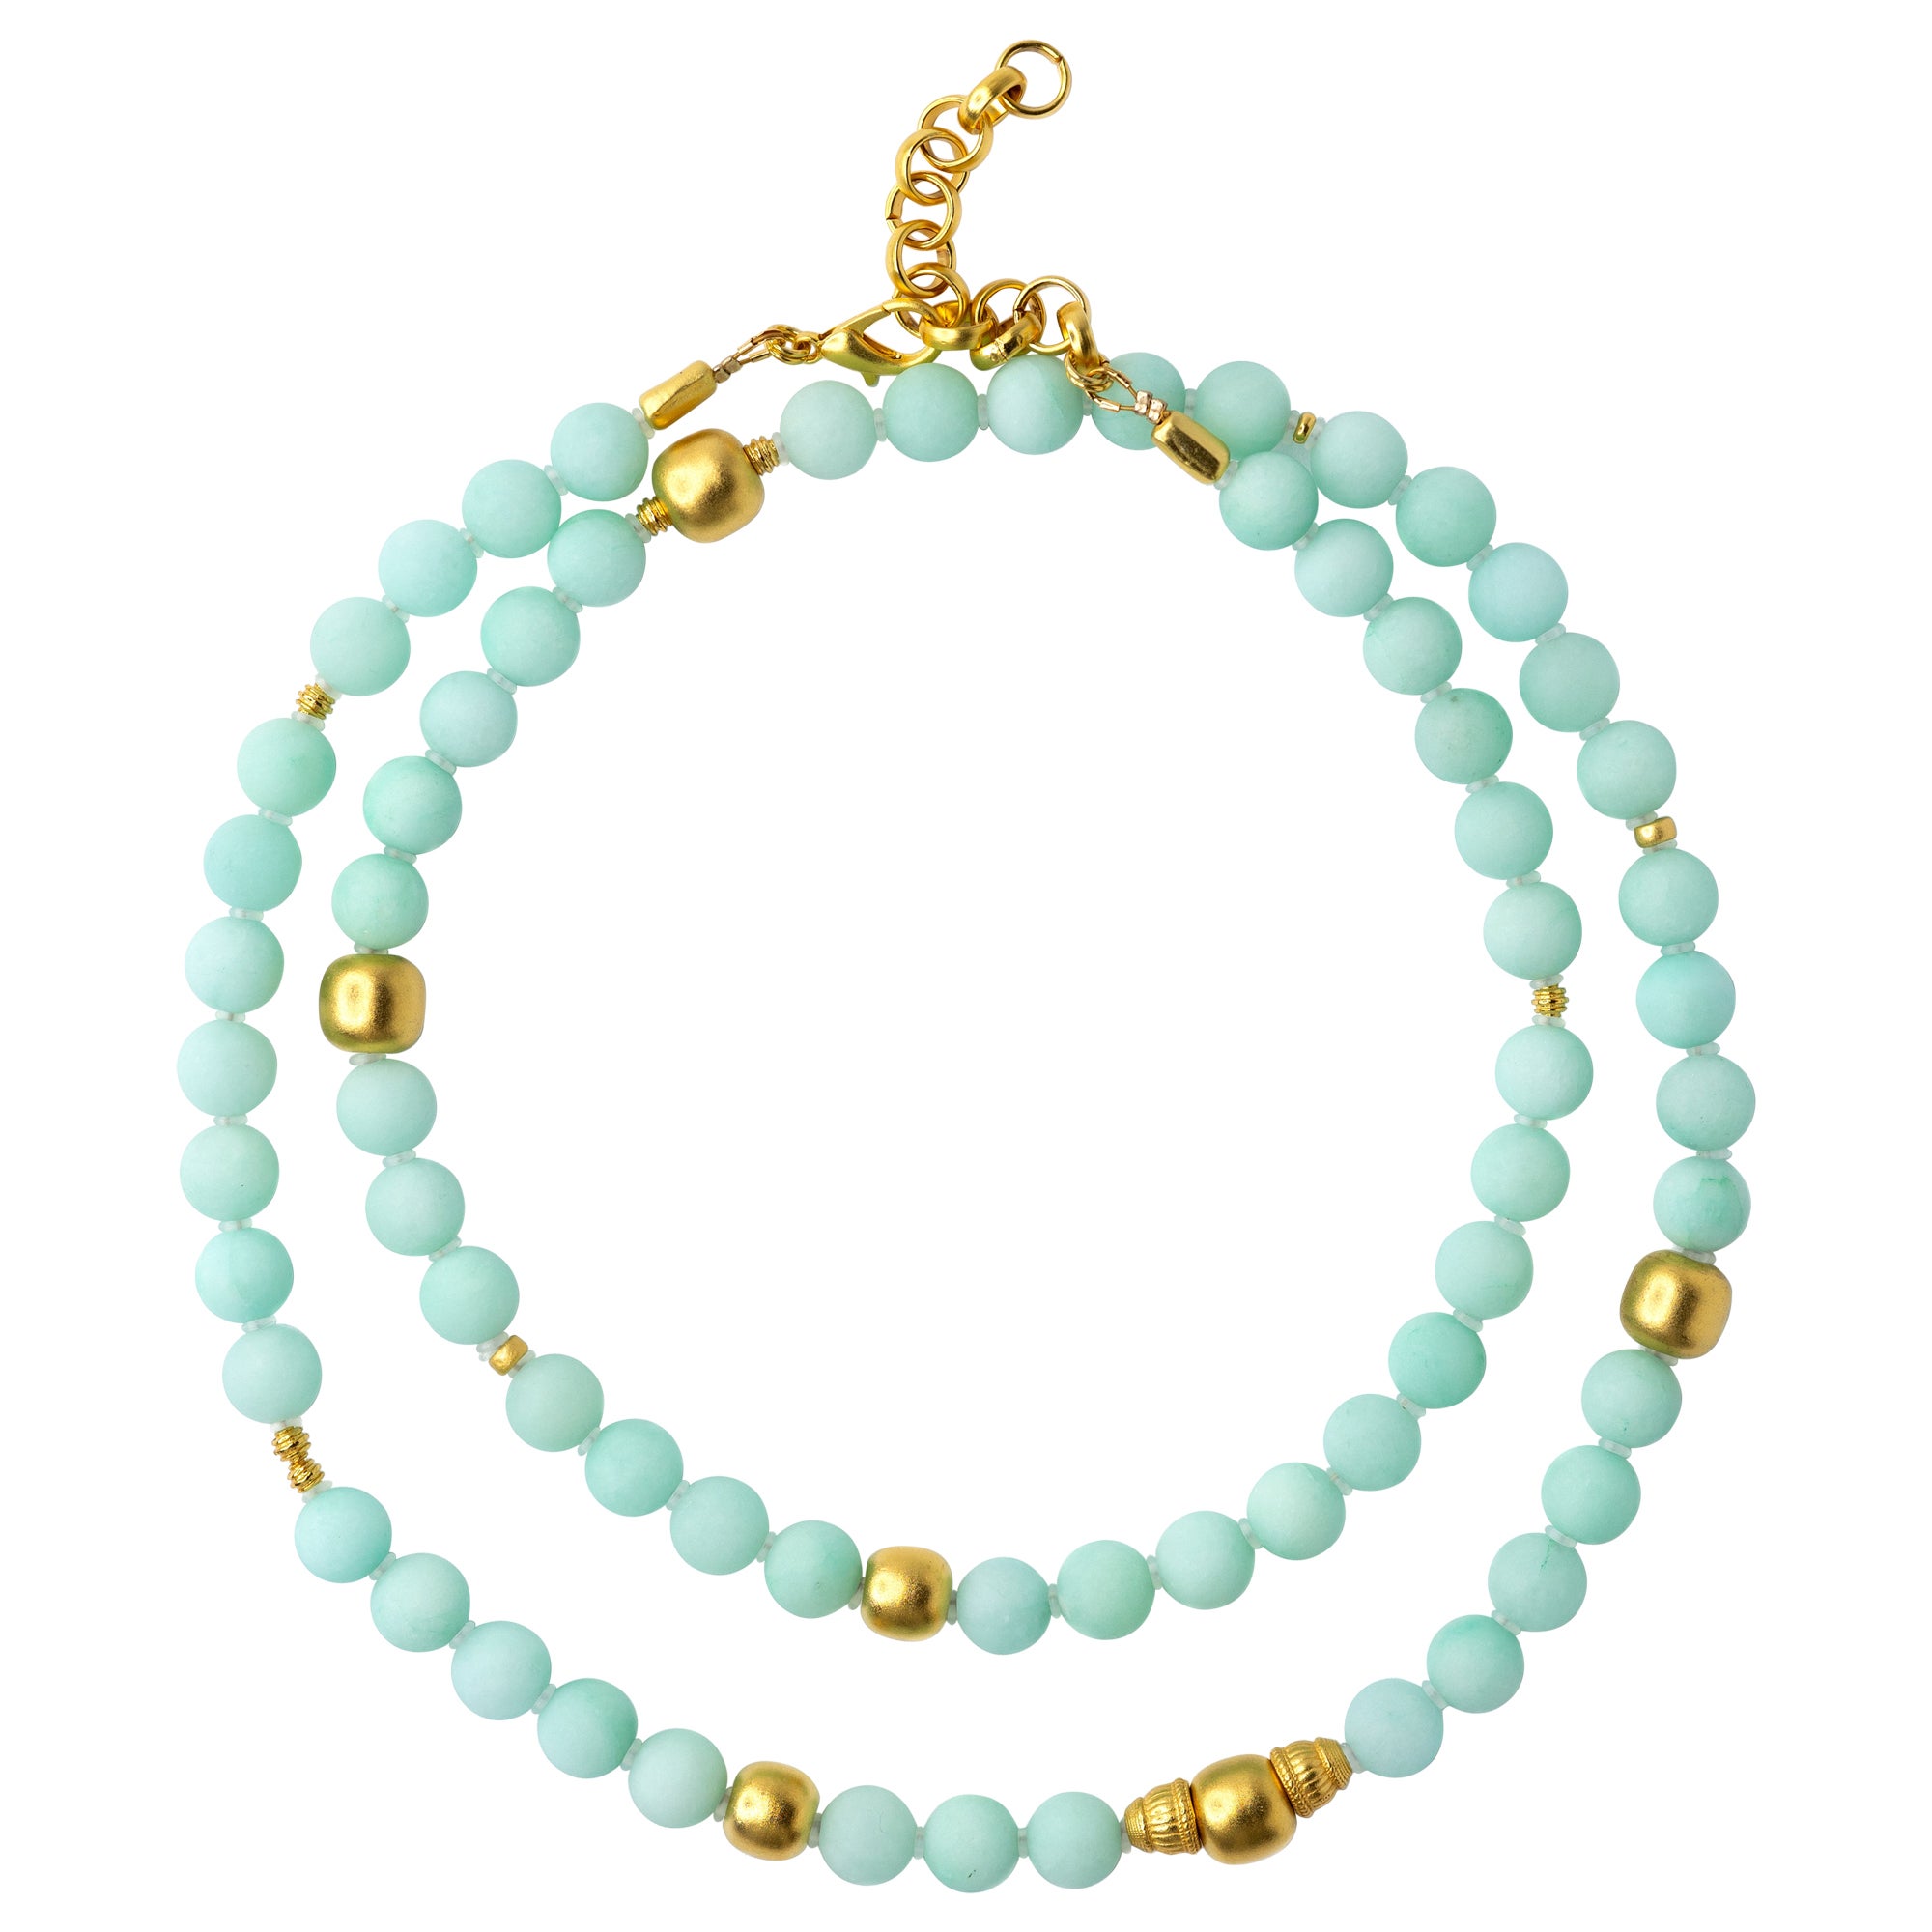 Monsieur Mint Chalcedony Necklace by Bombyx House